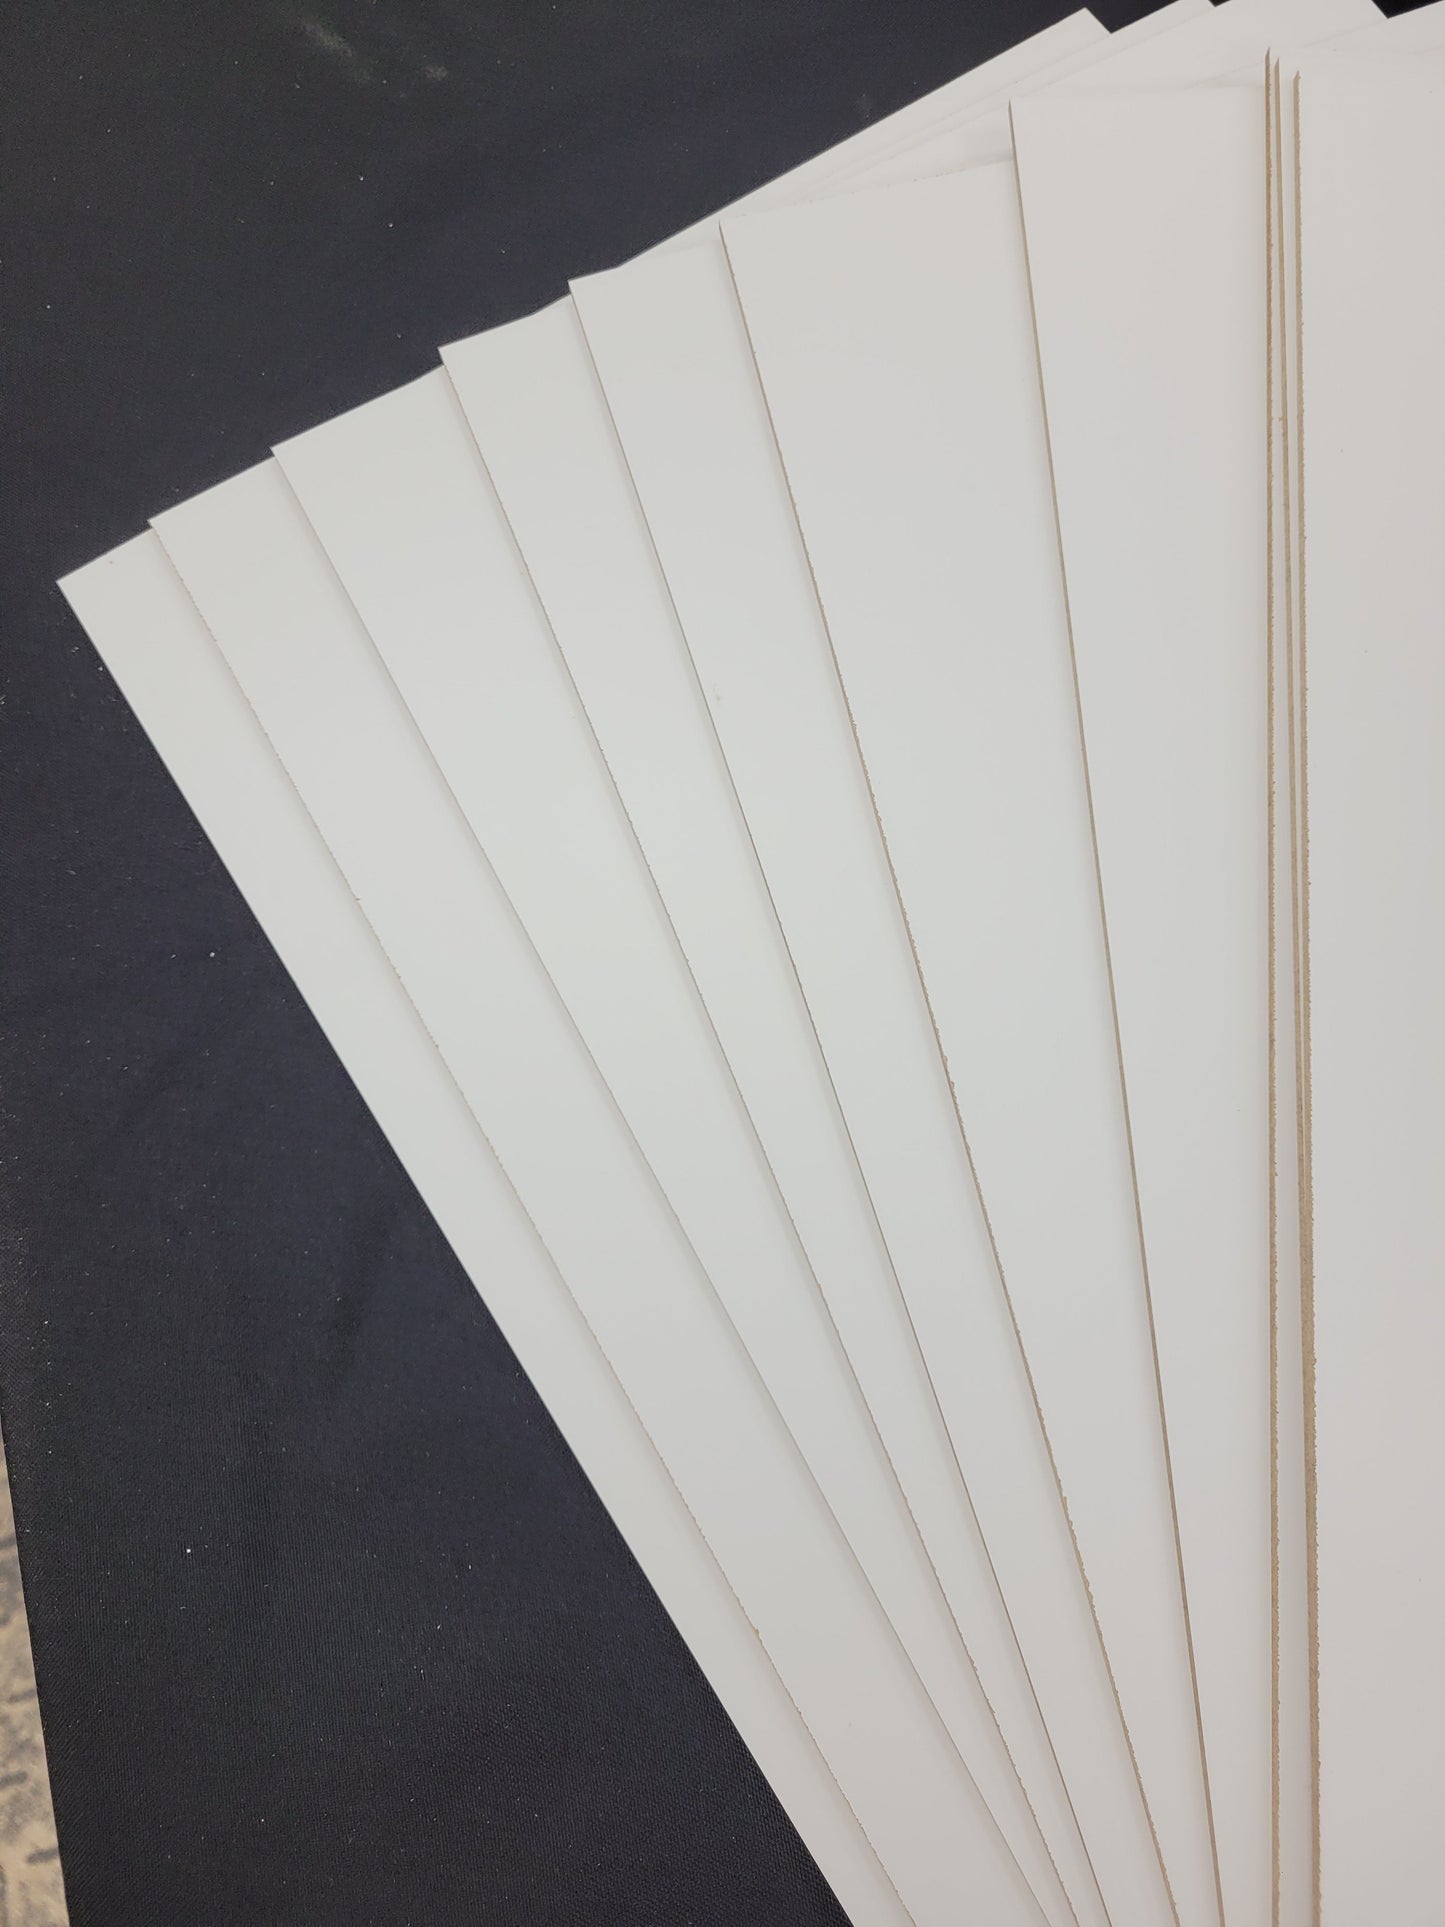 LOCAL PICK UP ONLY - 1/8" Premium Double-Sided White MDF/HDF Draft Board 11.75" x 16"